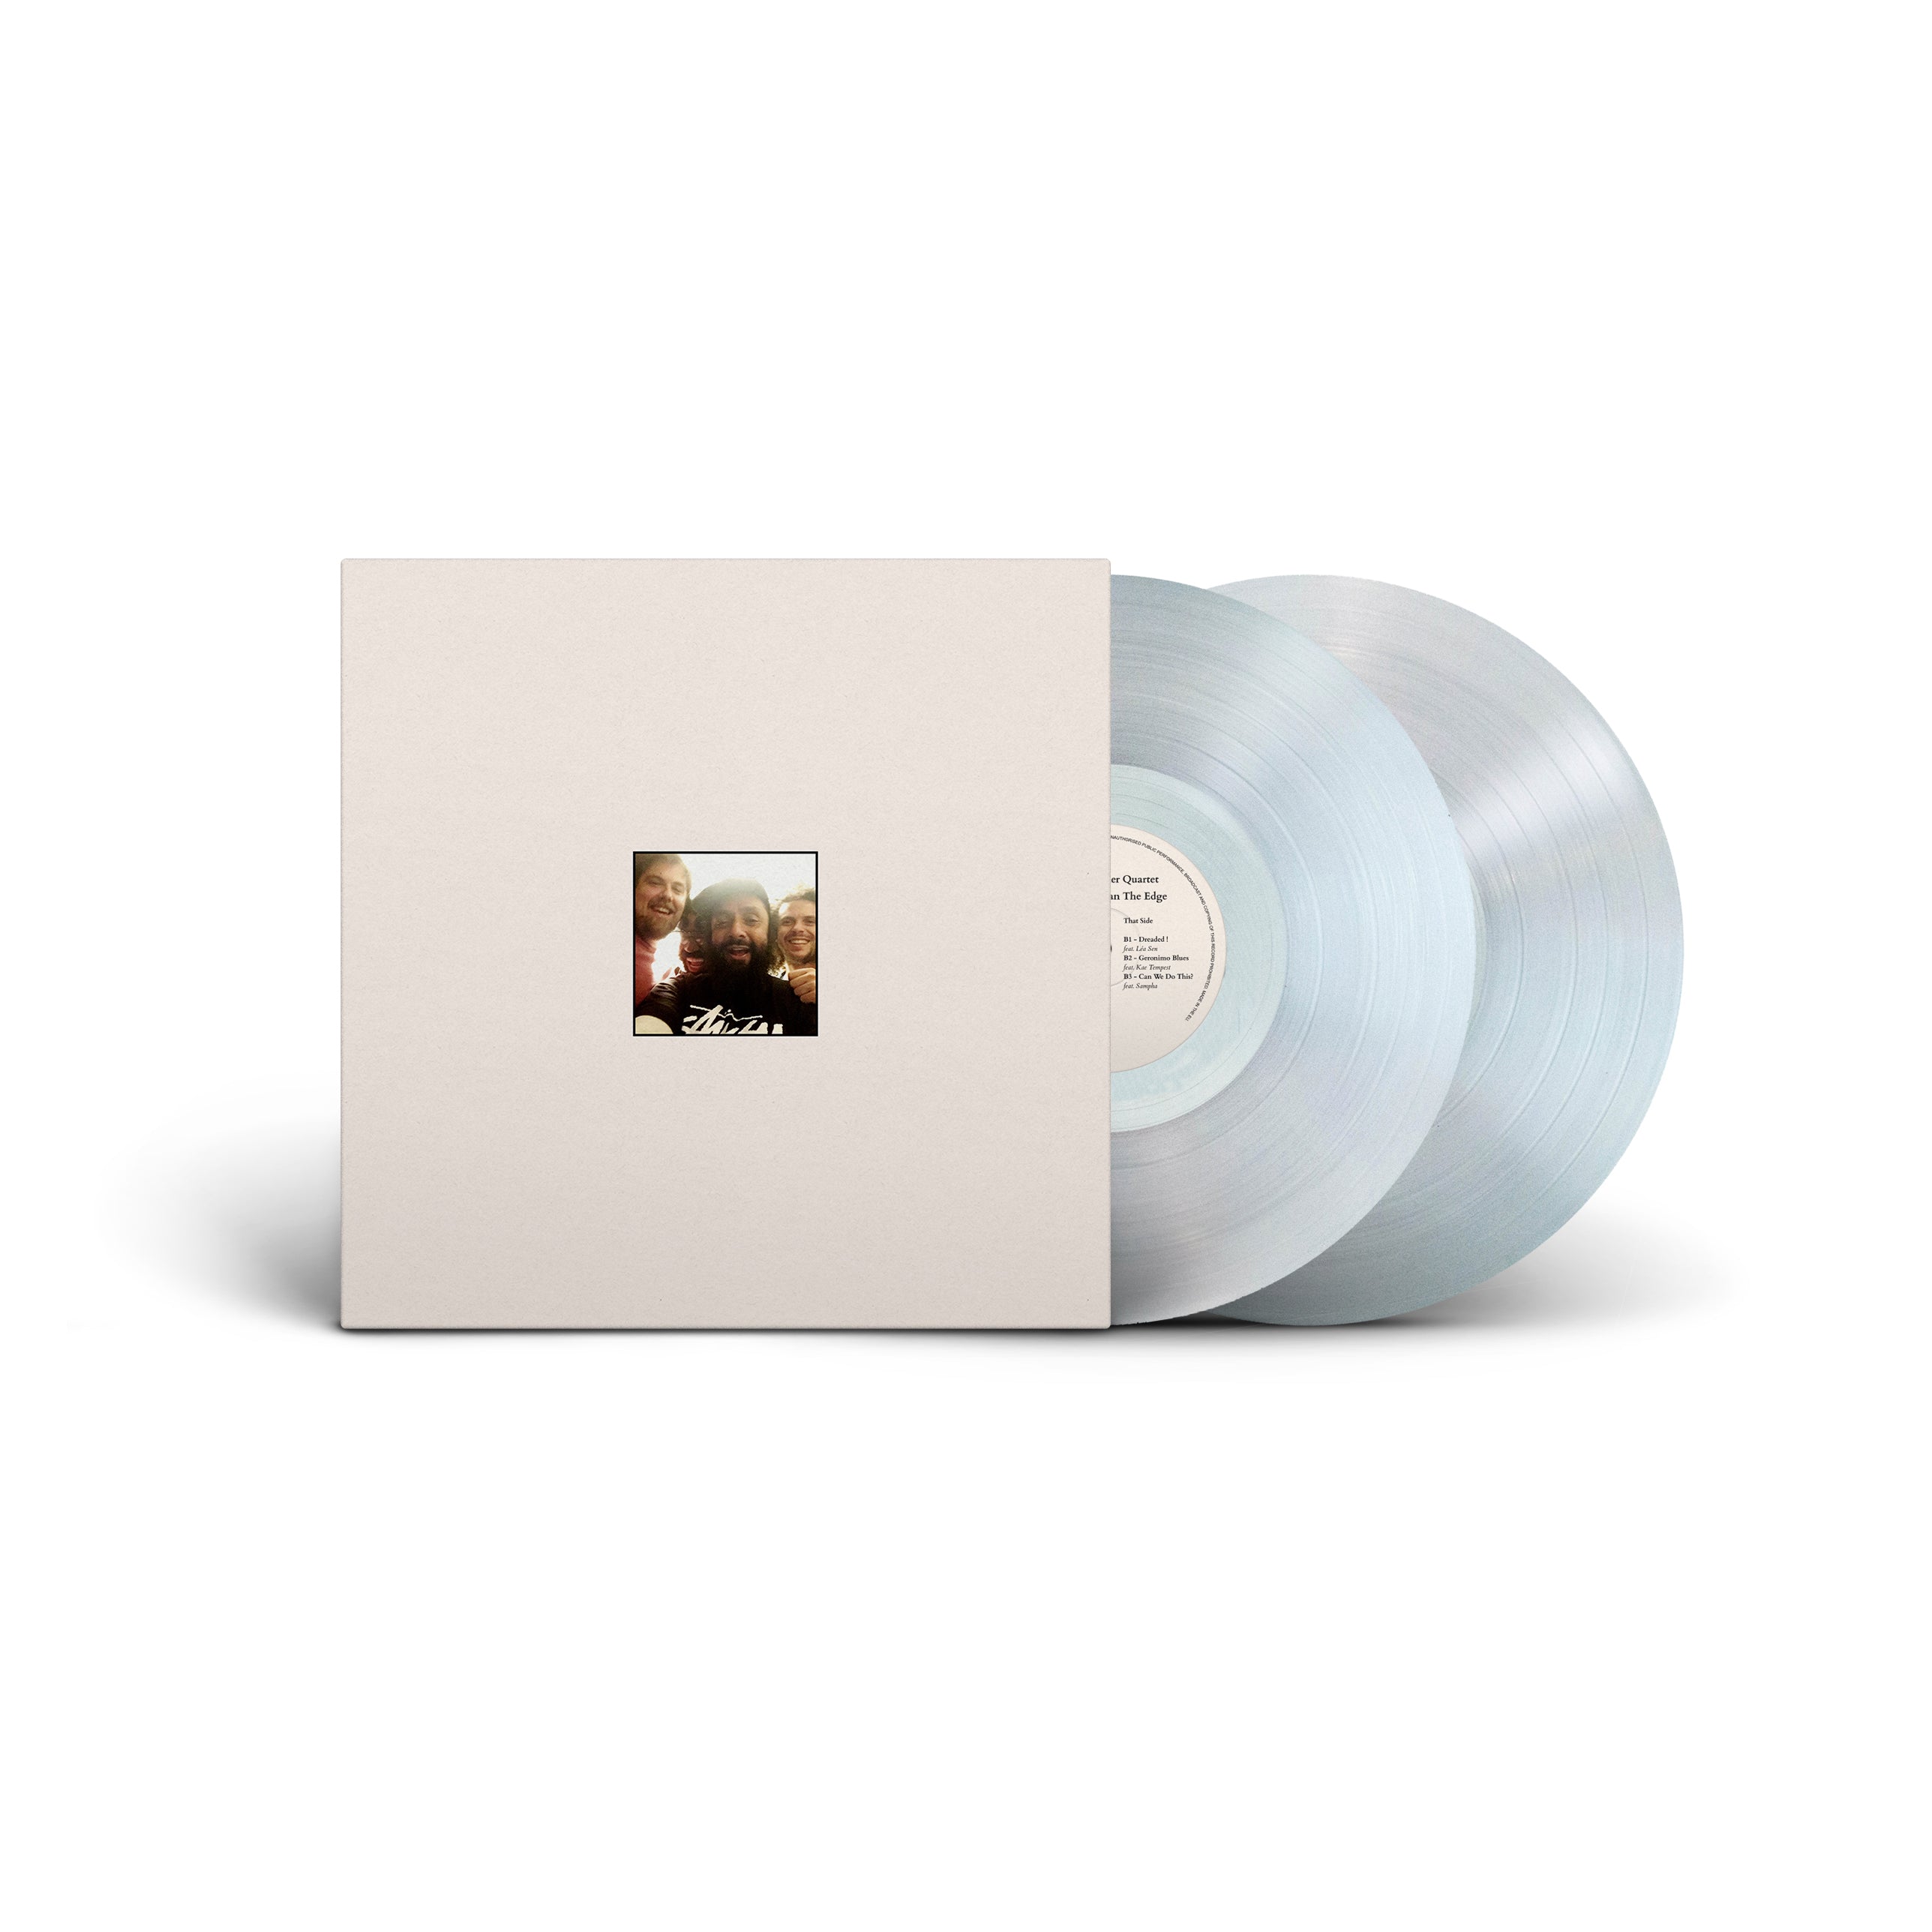 Further Out Than The Edge: Limited Edition Clear Vinyl 2LP